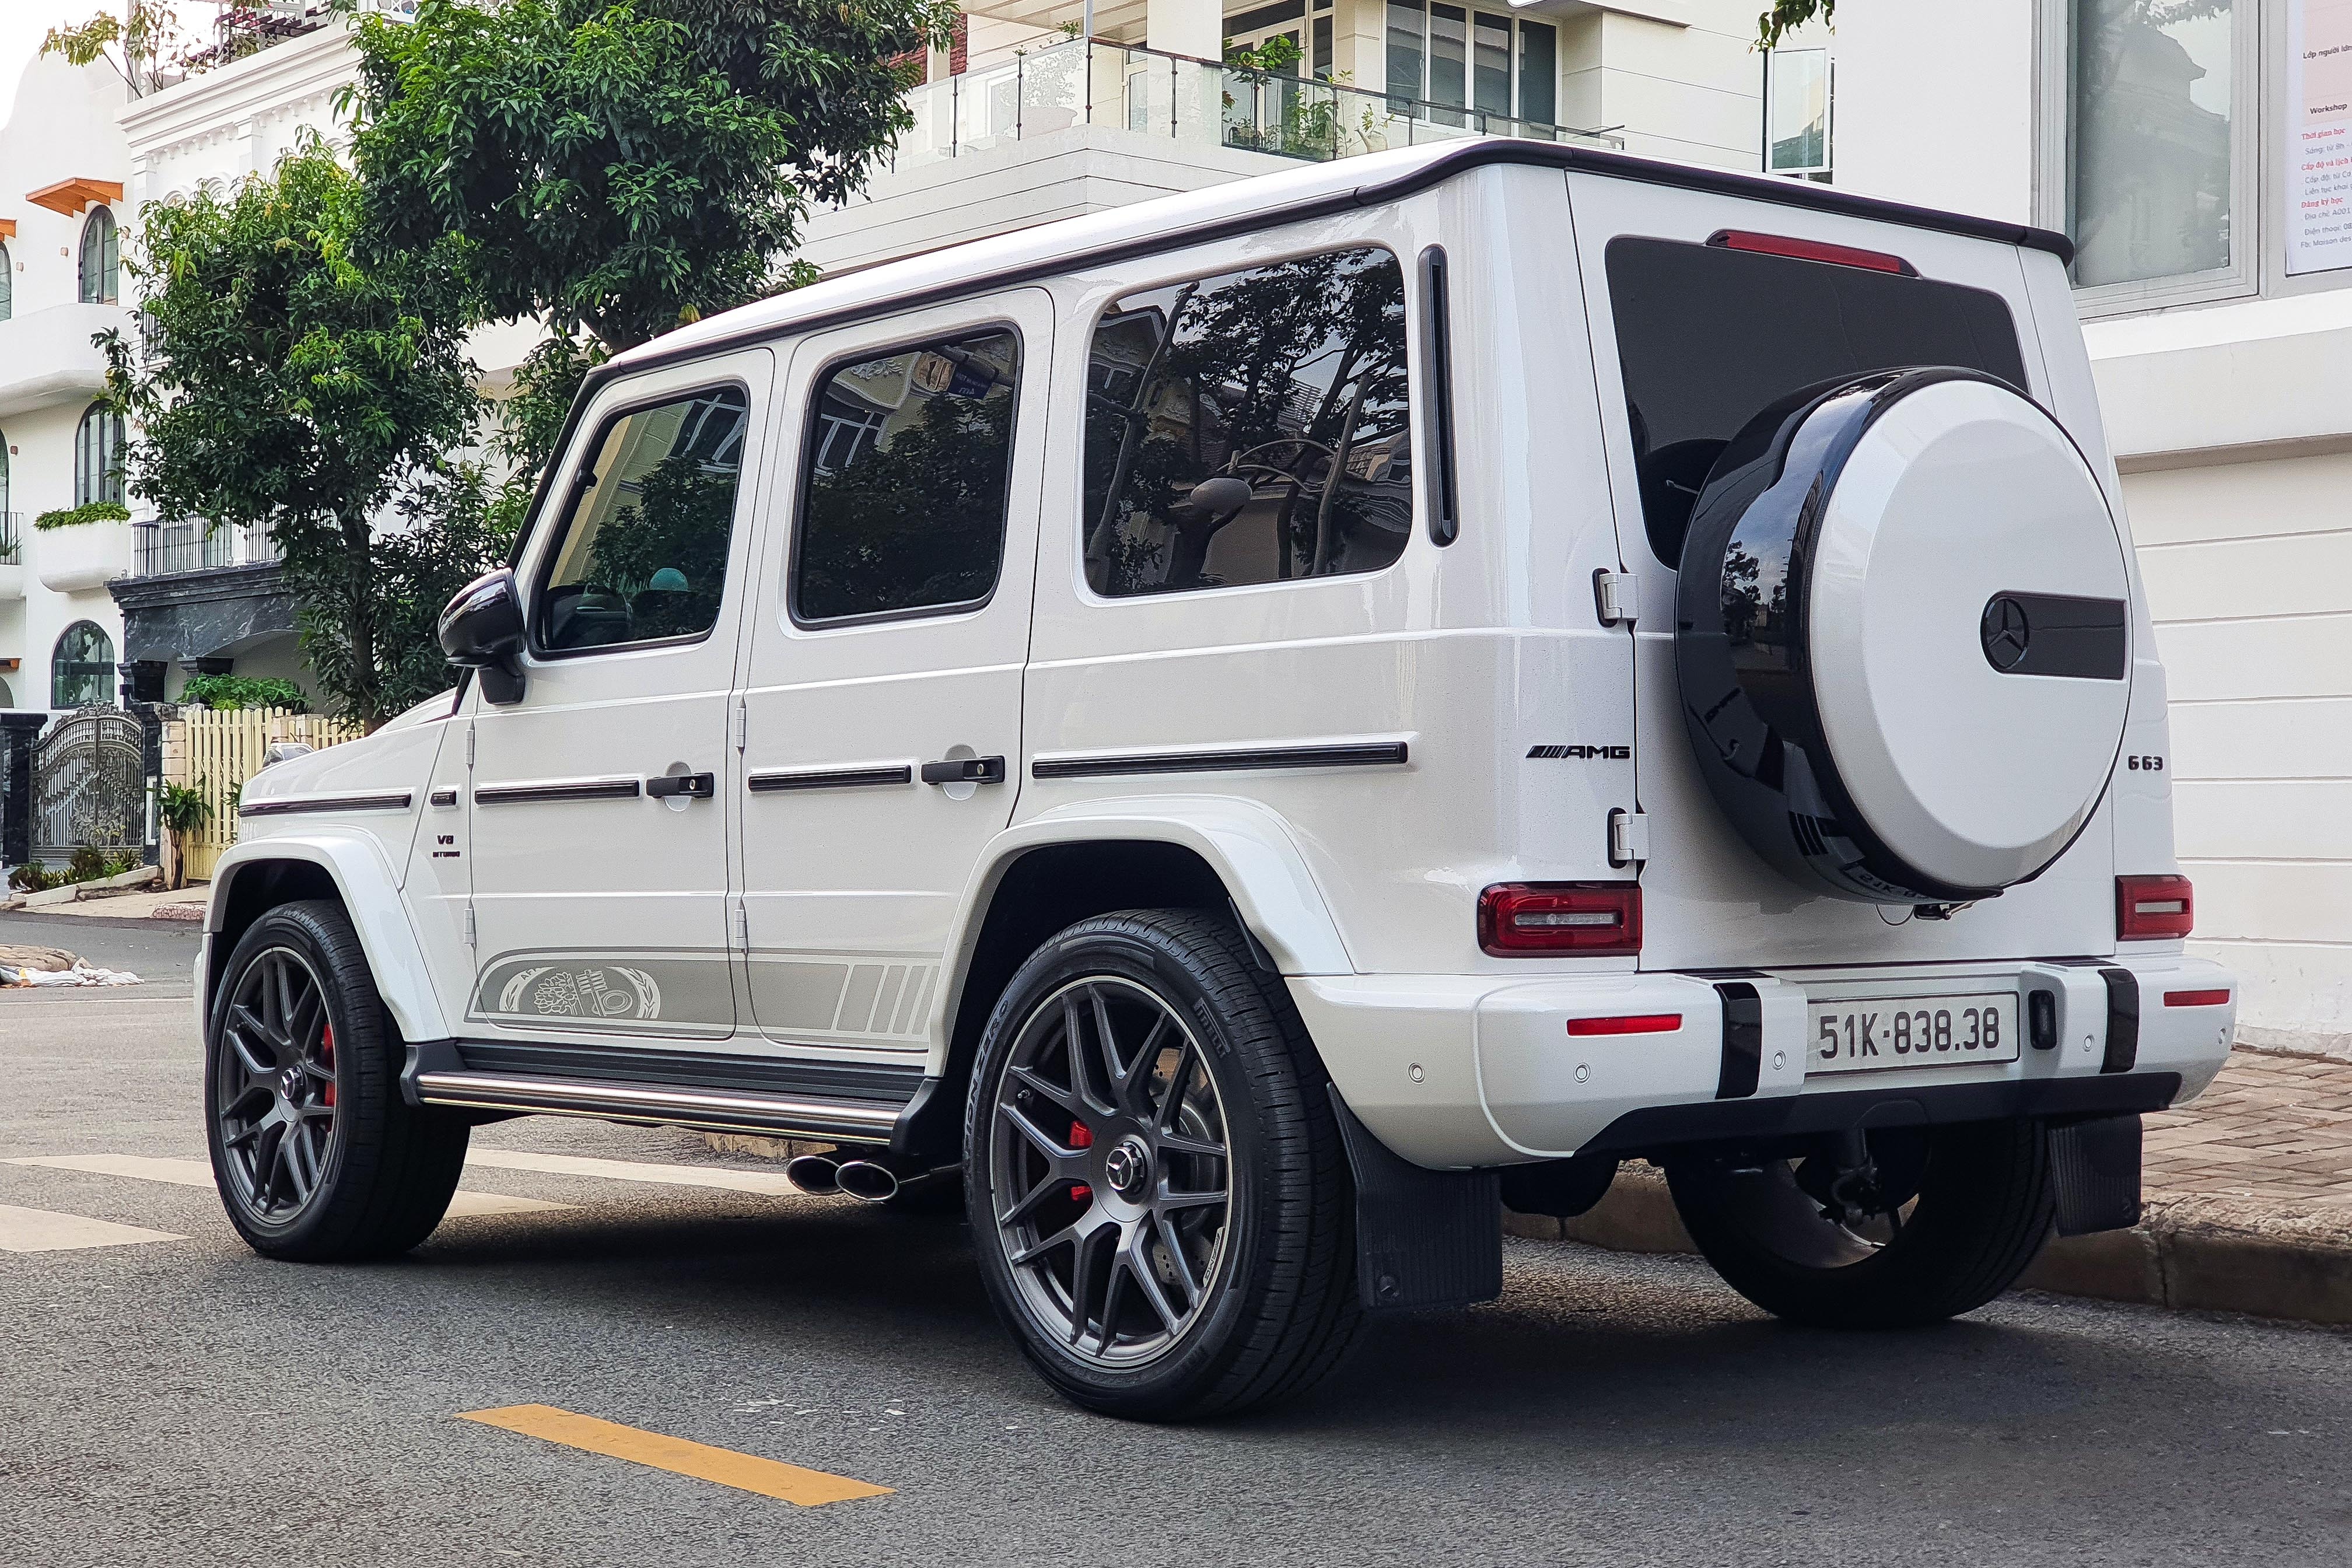 mercedes,  benz,  mercedes-benz,  amg,  mercedes-amg,  g63,  g 63,  edition 55,  g63 edition 55,  suv,  hieu suat cao,  g 63 edition 55 anh 2